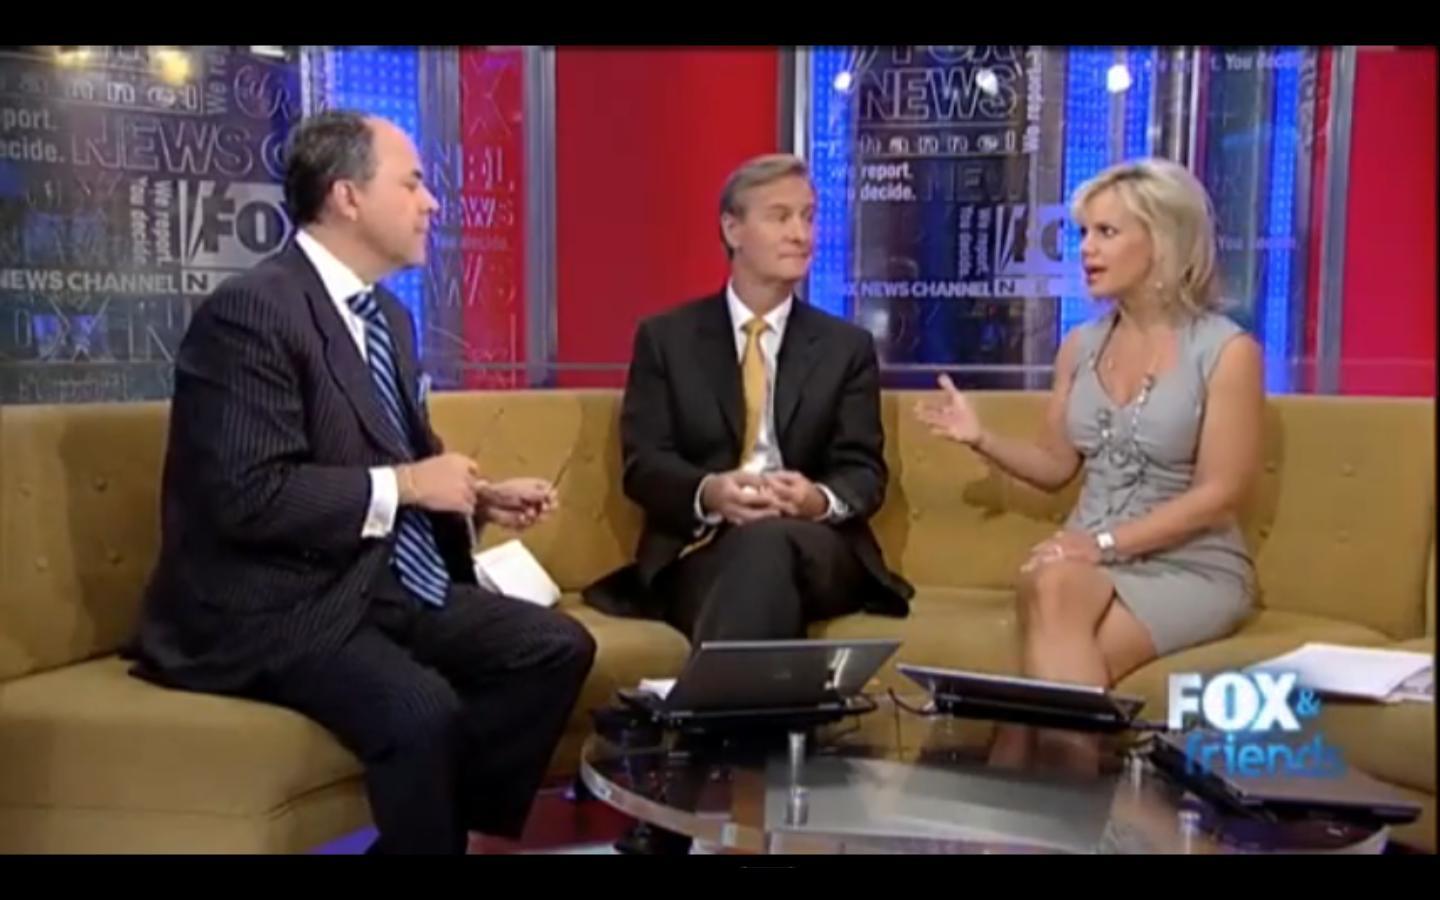 Reporter101 Blogspot: UK Morning Show and Fox News Fox and Friends caps.